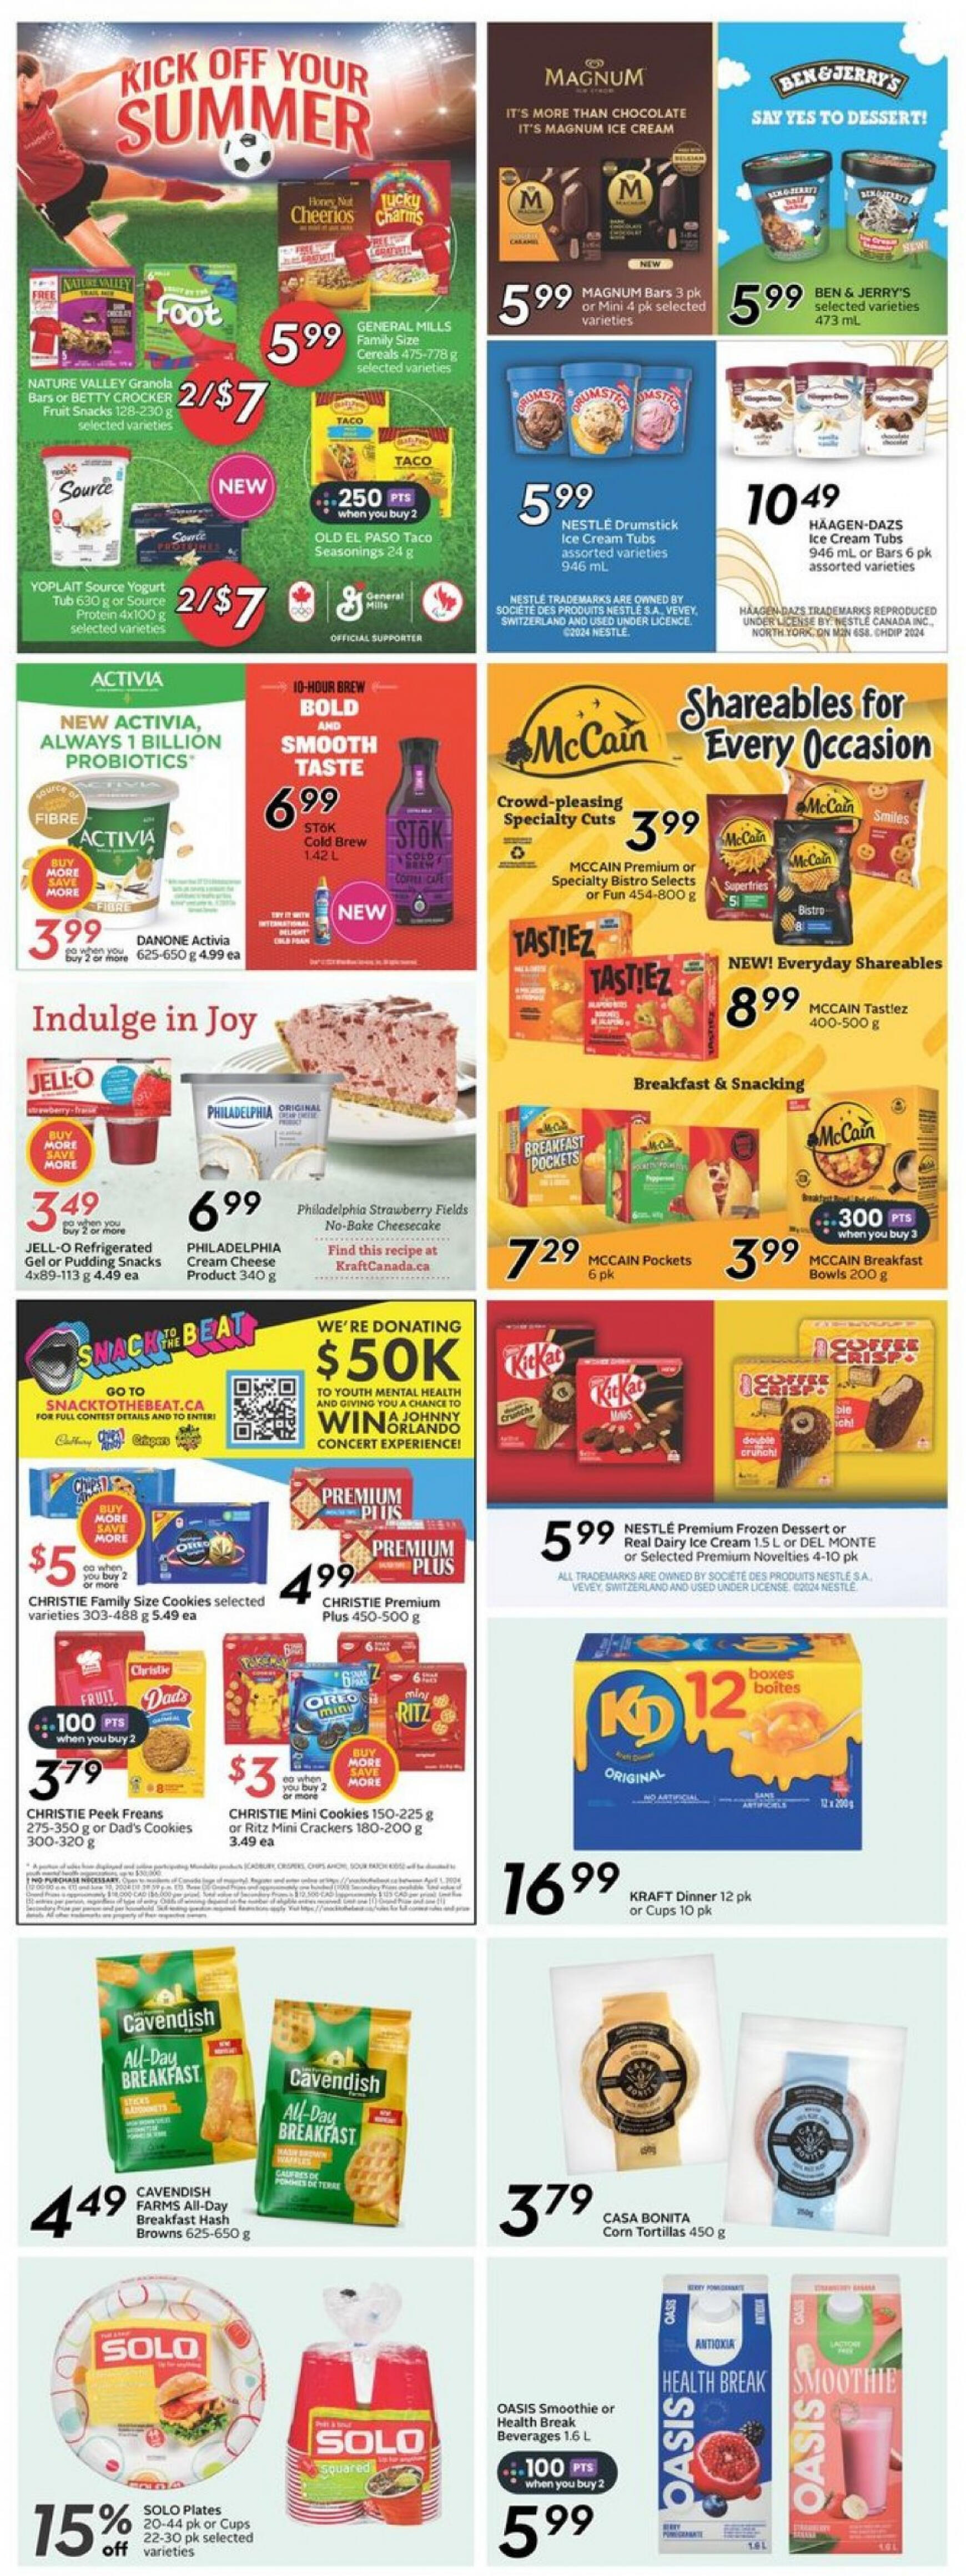 sobeys - Sobeys - Weekly Flyer - Ontario flyer current 02.05. - 08.05. - page: 20